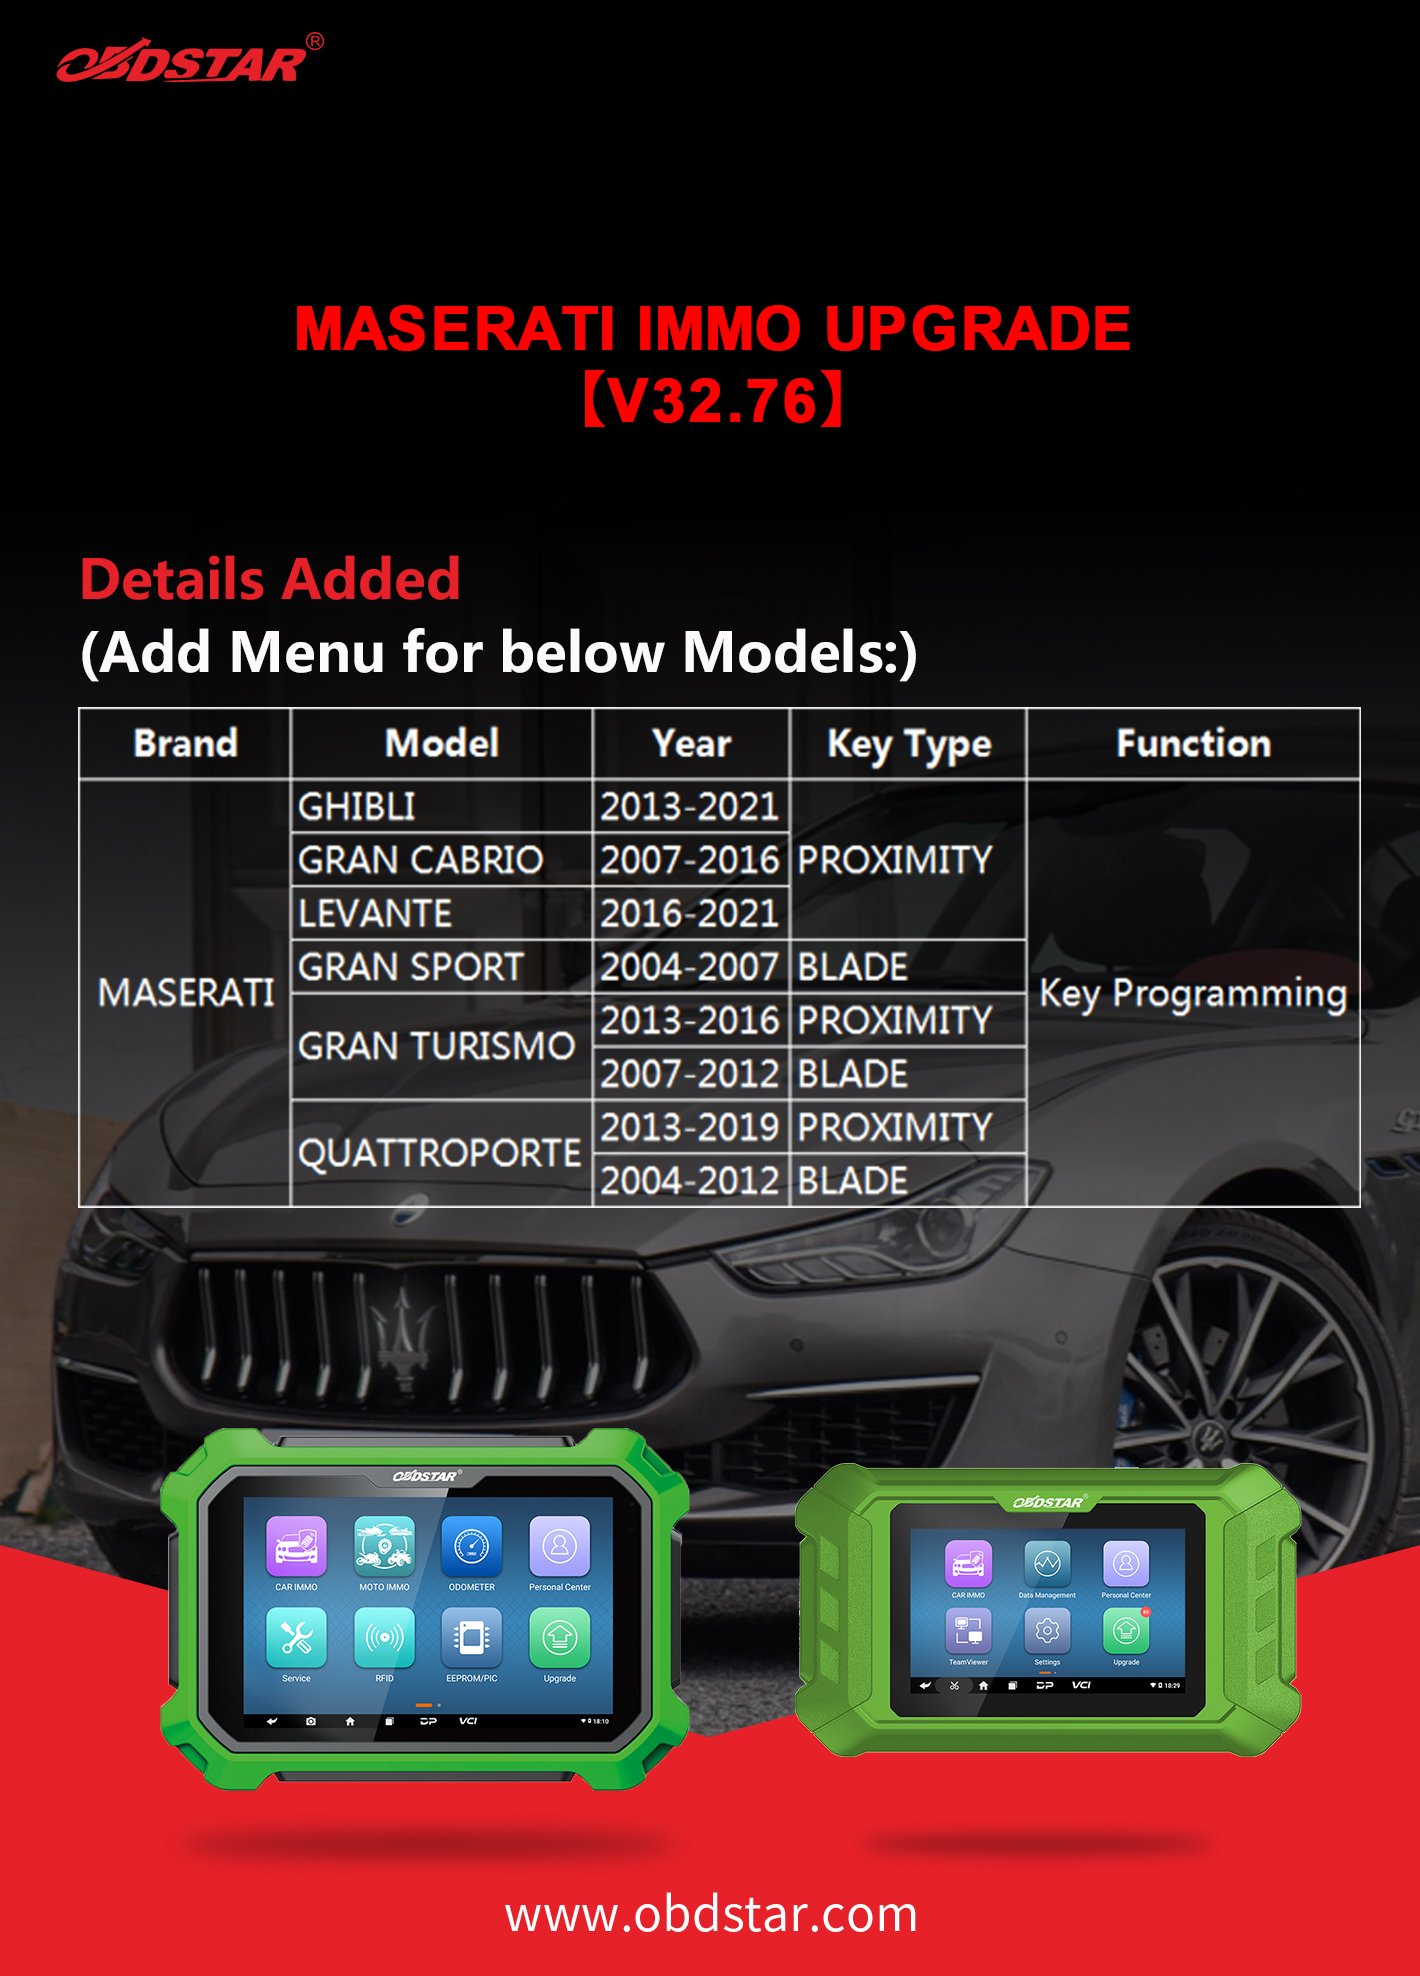 Maserati V33.76 Immo Upgrade on OBDSTAR X300 DP Plus and X300 DP and x300 Pro4